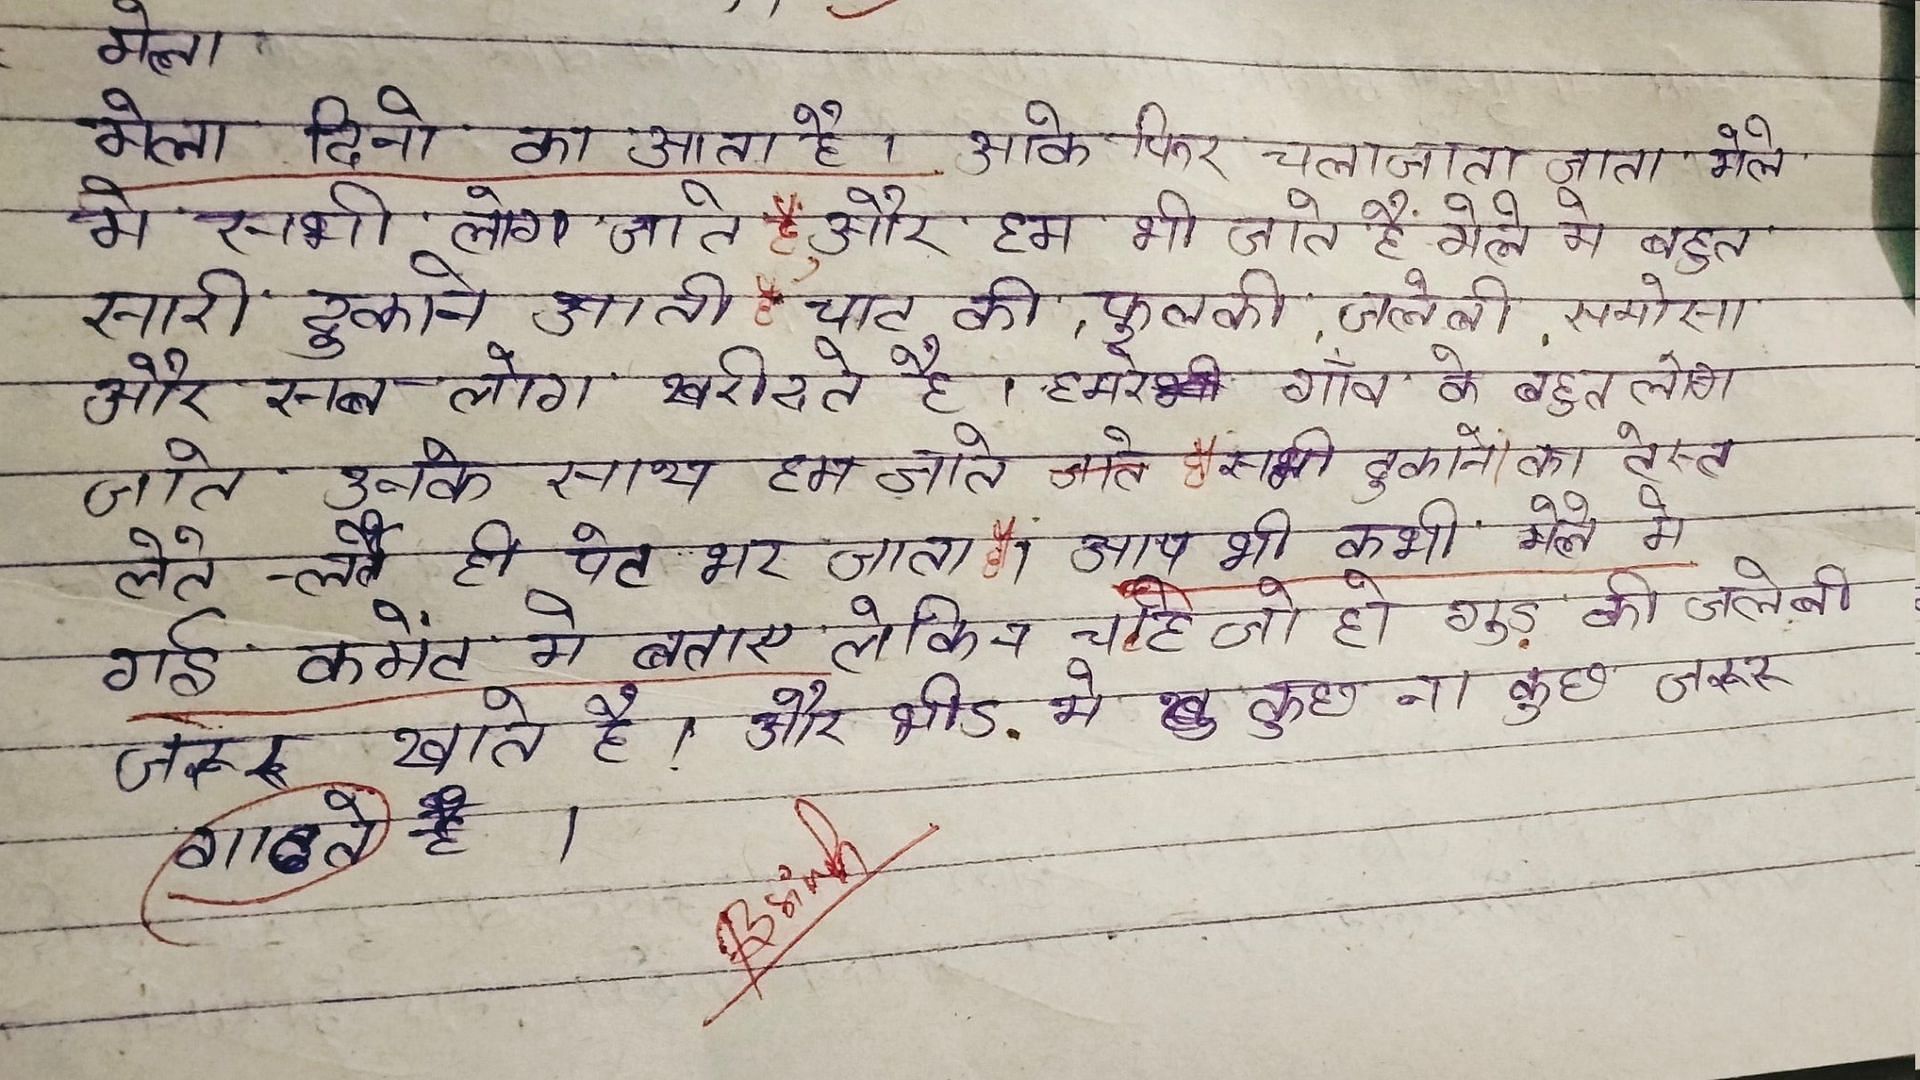 class 8 student writes funny essay on mela answer sheet goes viral on social media